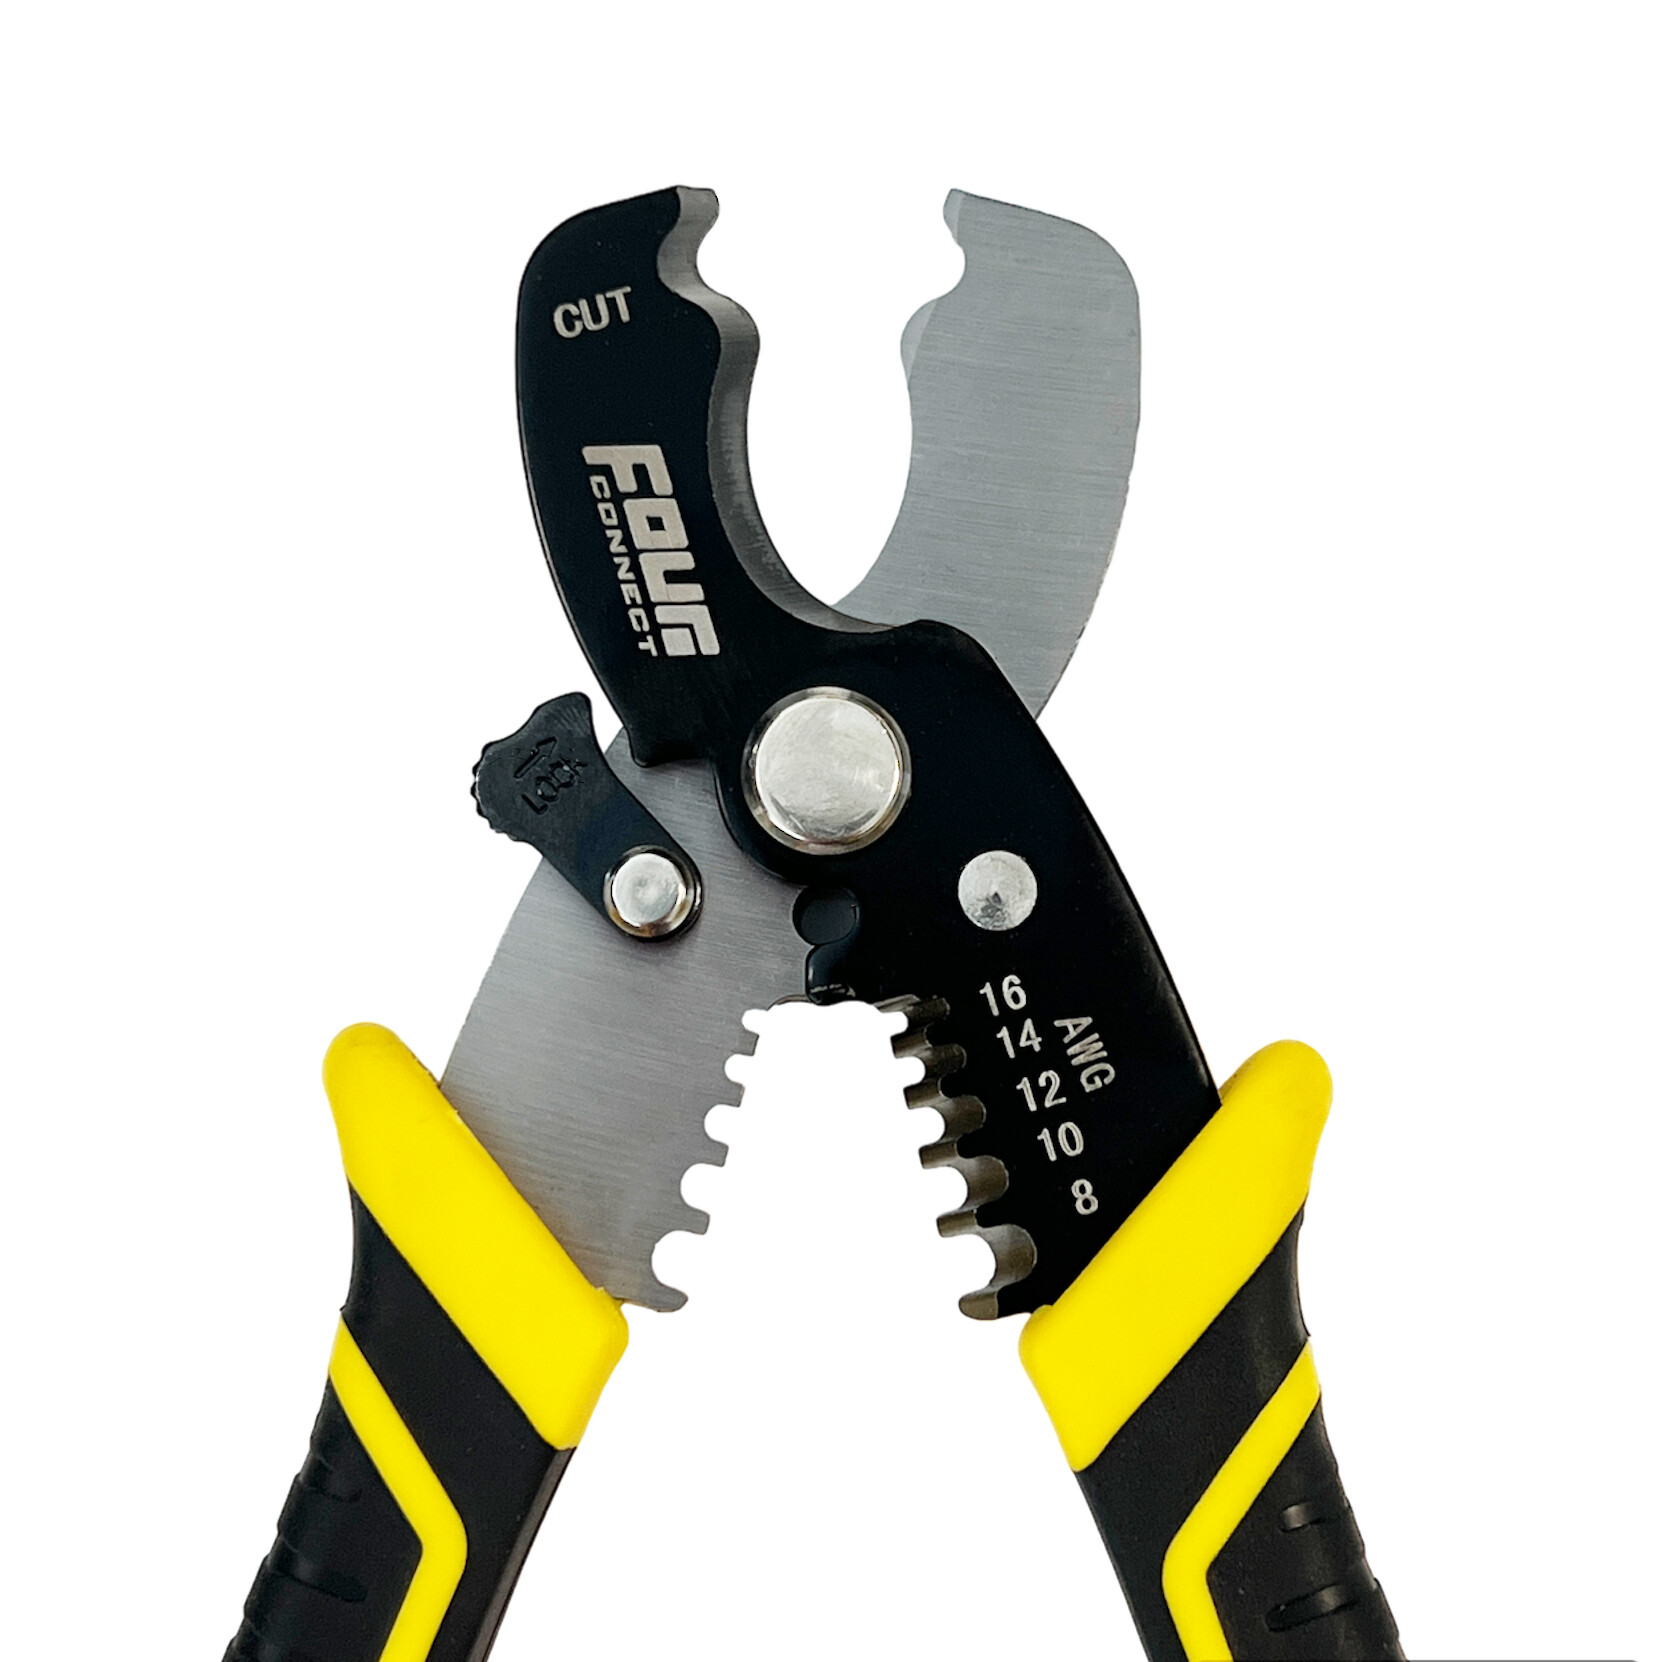 FOUR Connect 4-600119 cable cutter and stripper tool